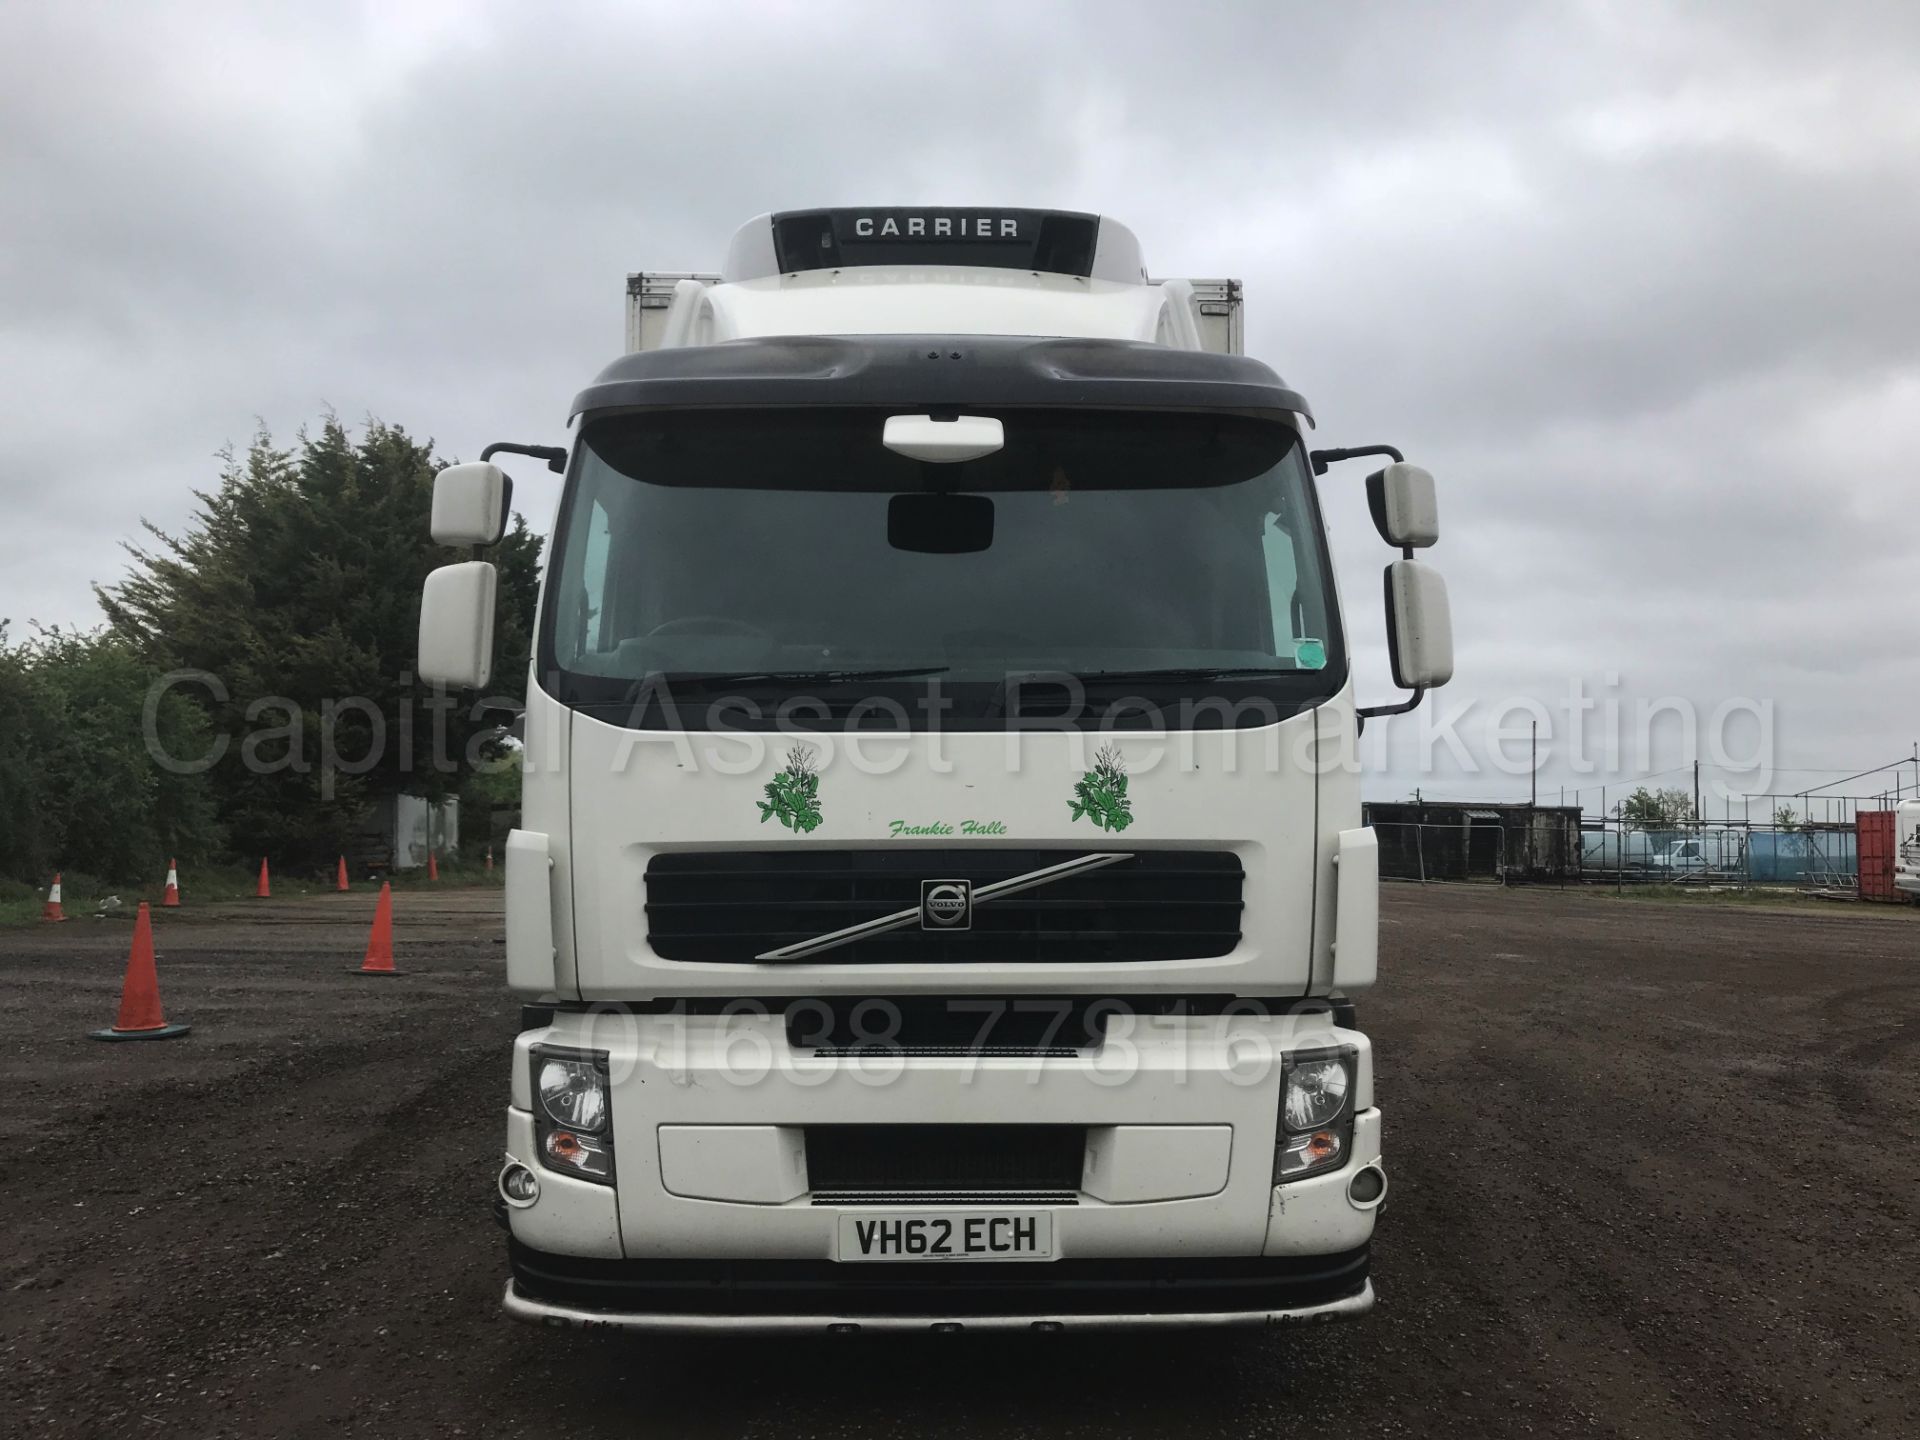 VOLVO ES260 '18 TONNE - REFRIGERATED TRUCK' *SLEEPER CAB* (2013 MODEL) '7L DIESEL - AUTOMATIC' - Image 3 of 32